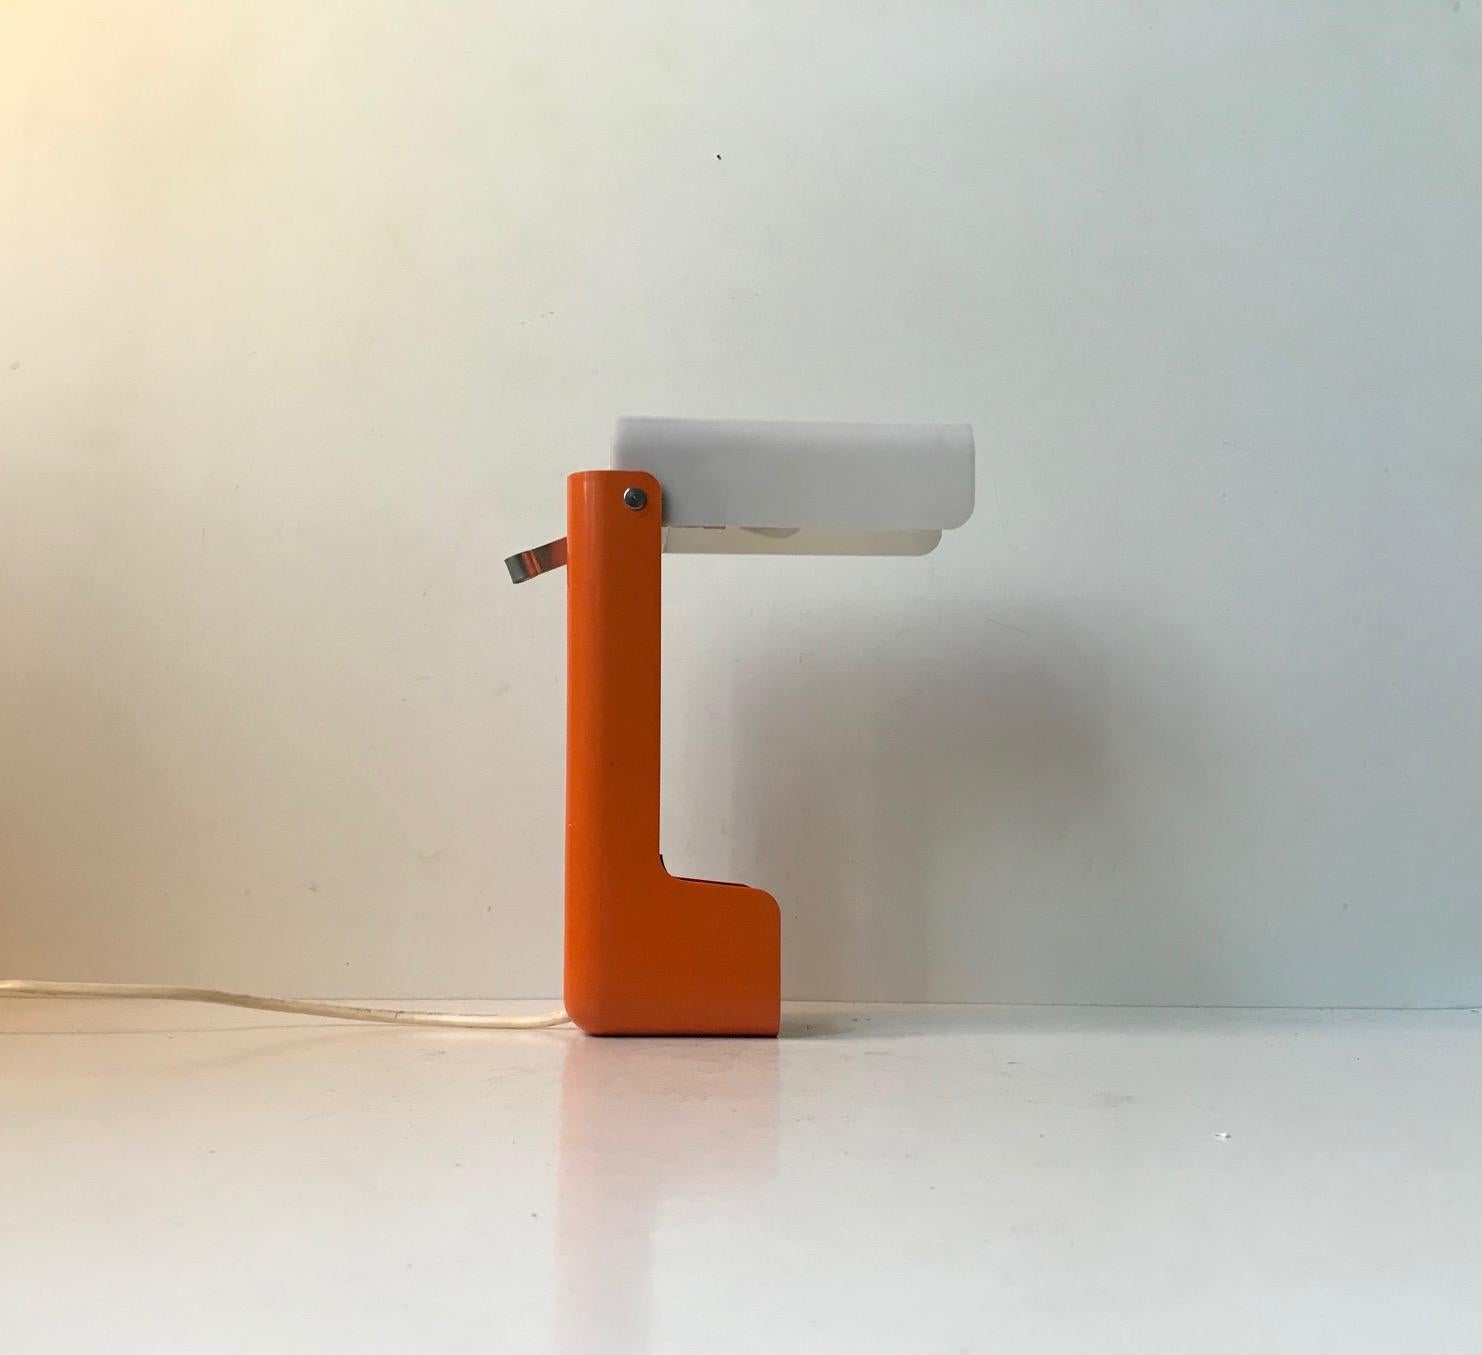 Modular multipurpose orange and white lamp that can be used as a table, wall or even a suspended light. Used as a table lamp it resembles a pelican. This model is from the late 1960s and is called ELL NA 417. It was manufactured and designed by Kreo